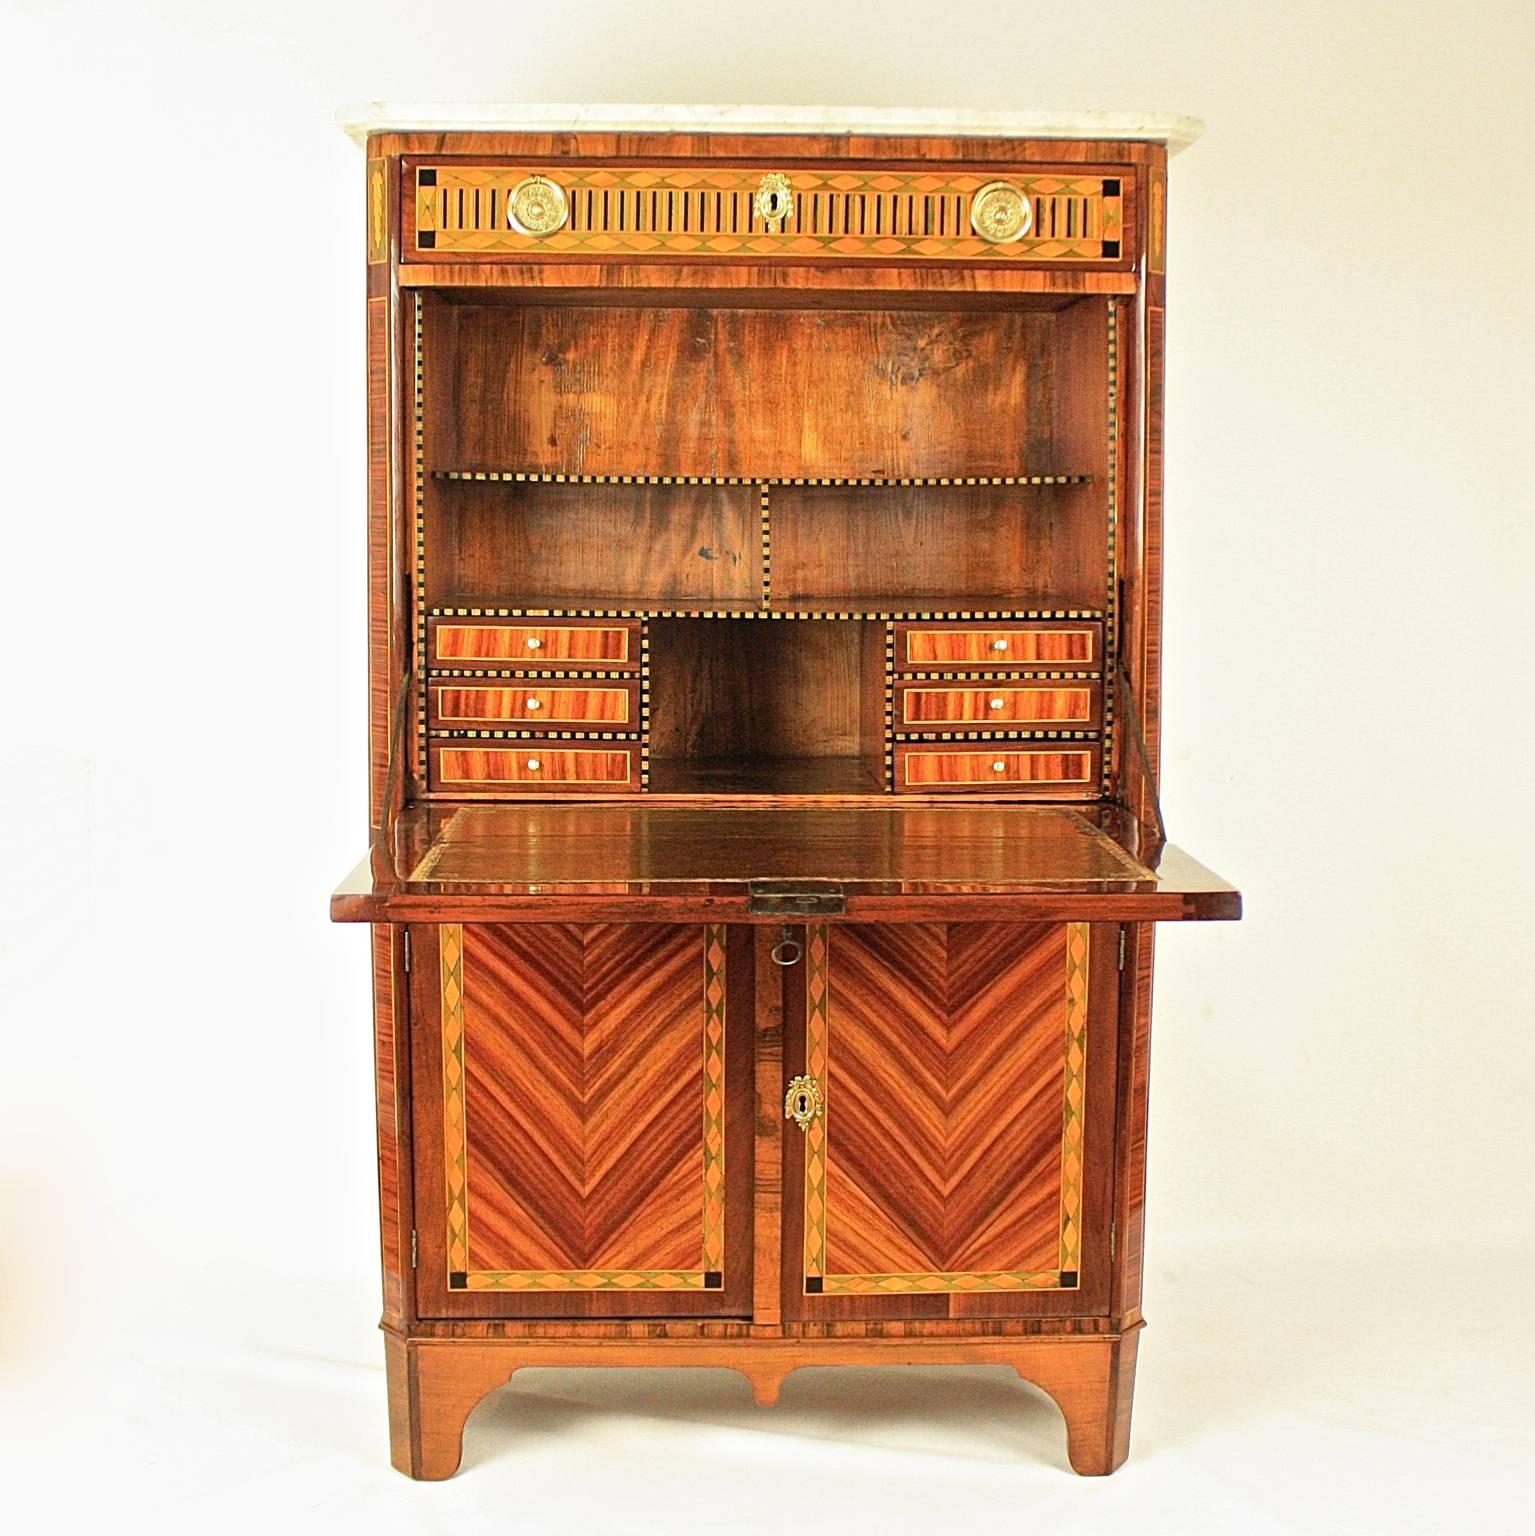 A 18th century Louis XVI drop-front secretaire (secrétaire à abattant), attributed to the menusier François-Noël Geny (1731-1804, maitre 1773) from Lyon.

The writing cabinet veneered in kingwood and tulipwood on a ground of pine. The top of